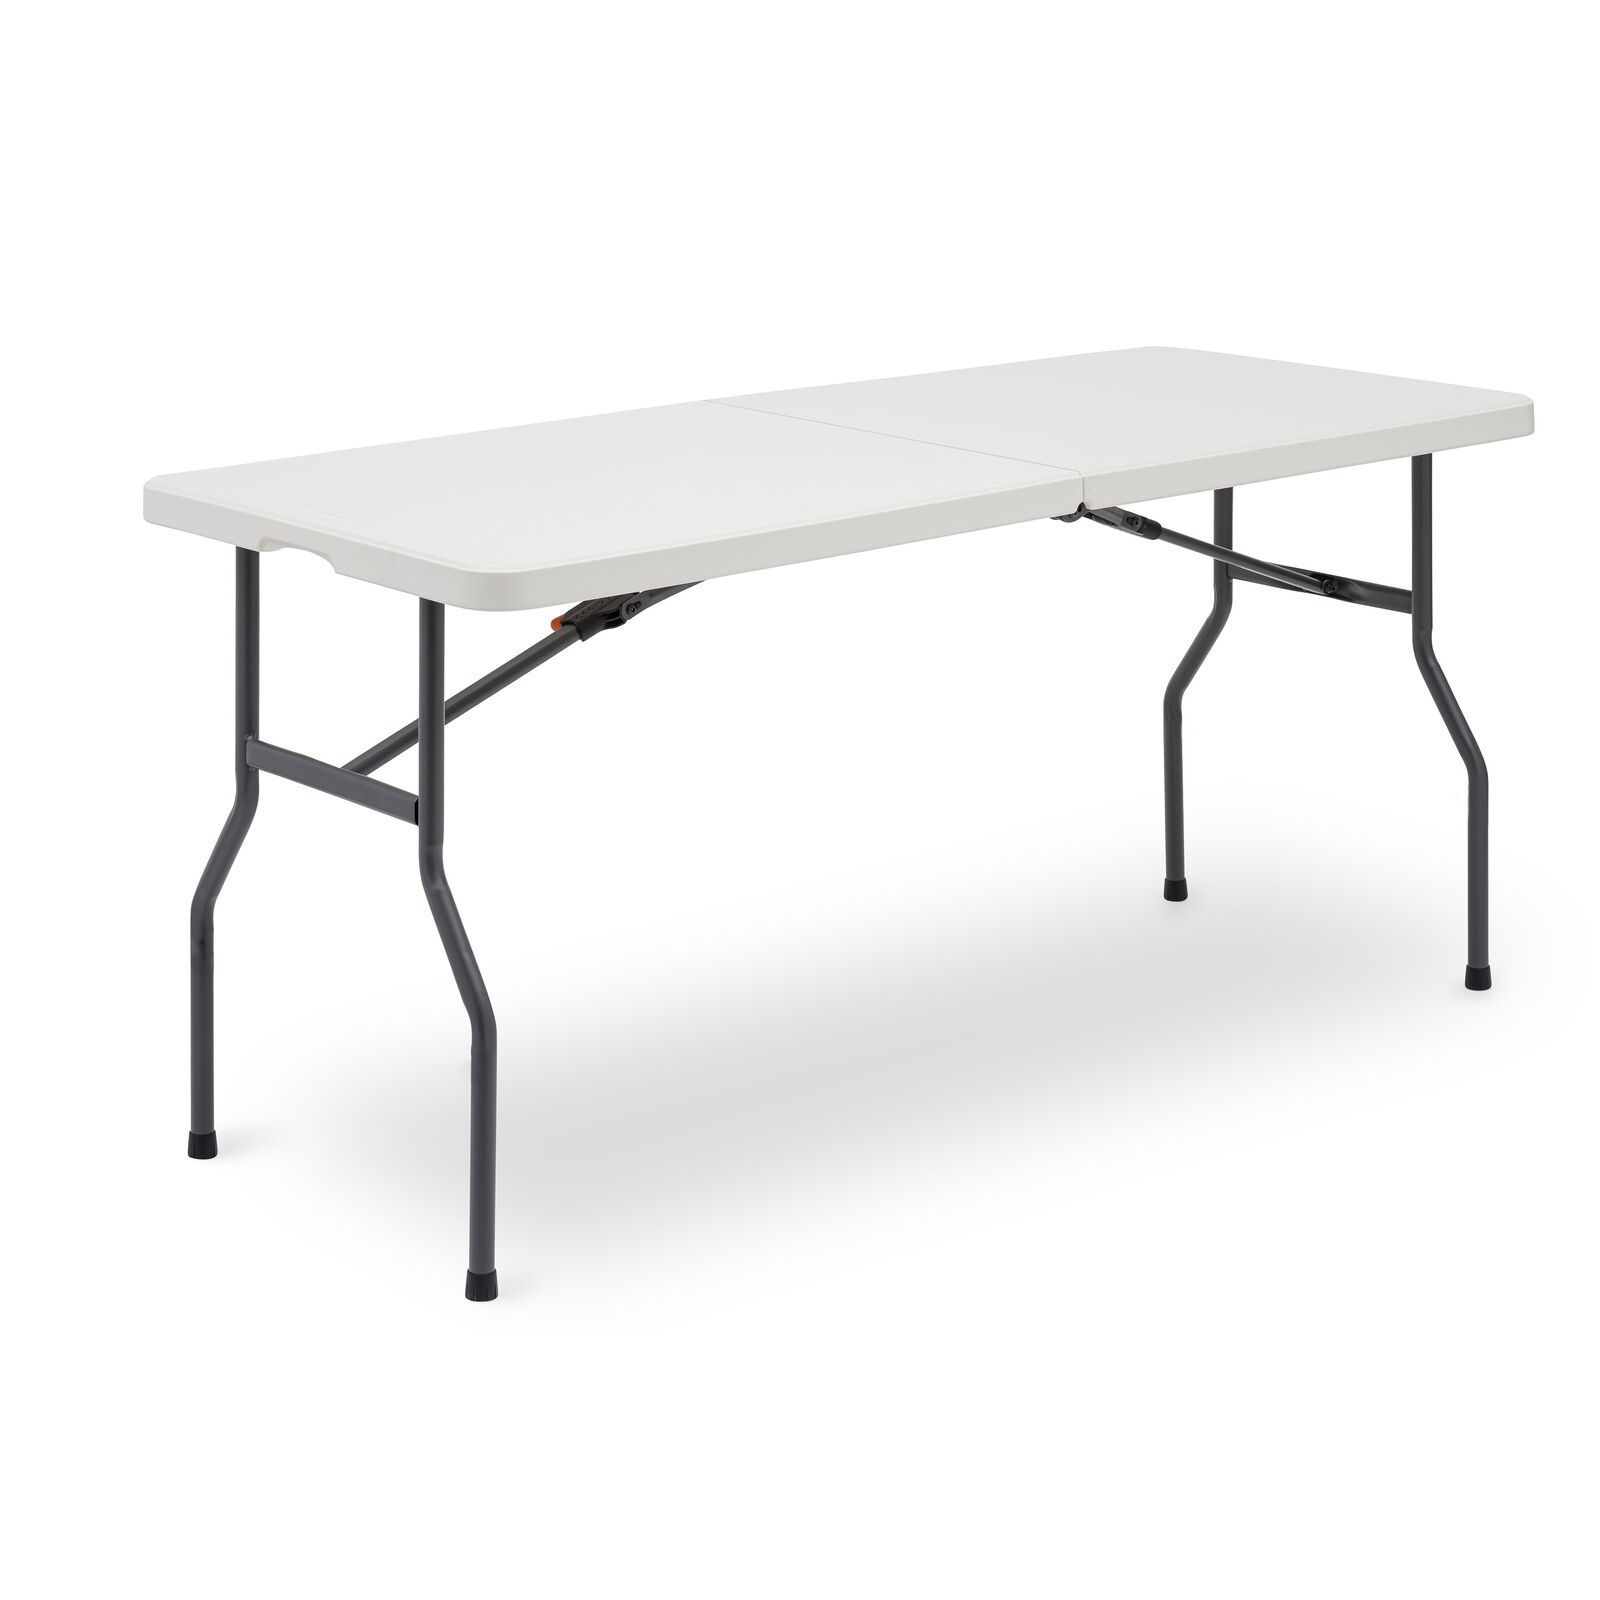 5-Foot Center Half Folding Table, White (Indoor and Outdoor Use), Size 5ft